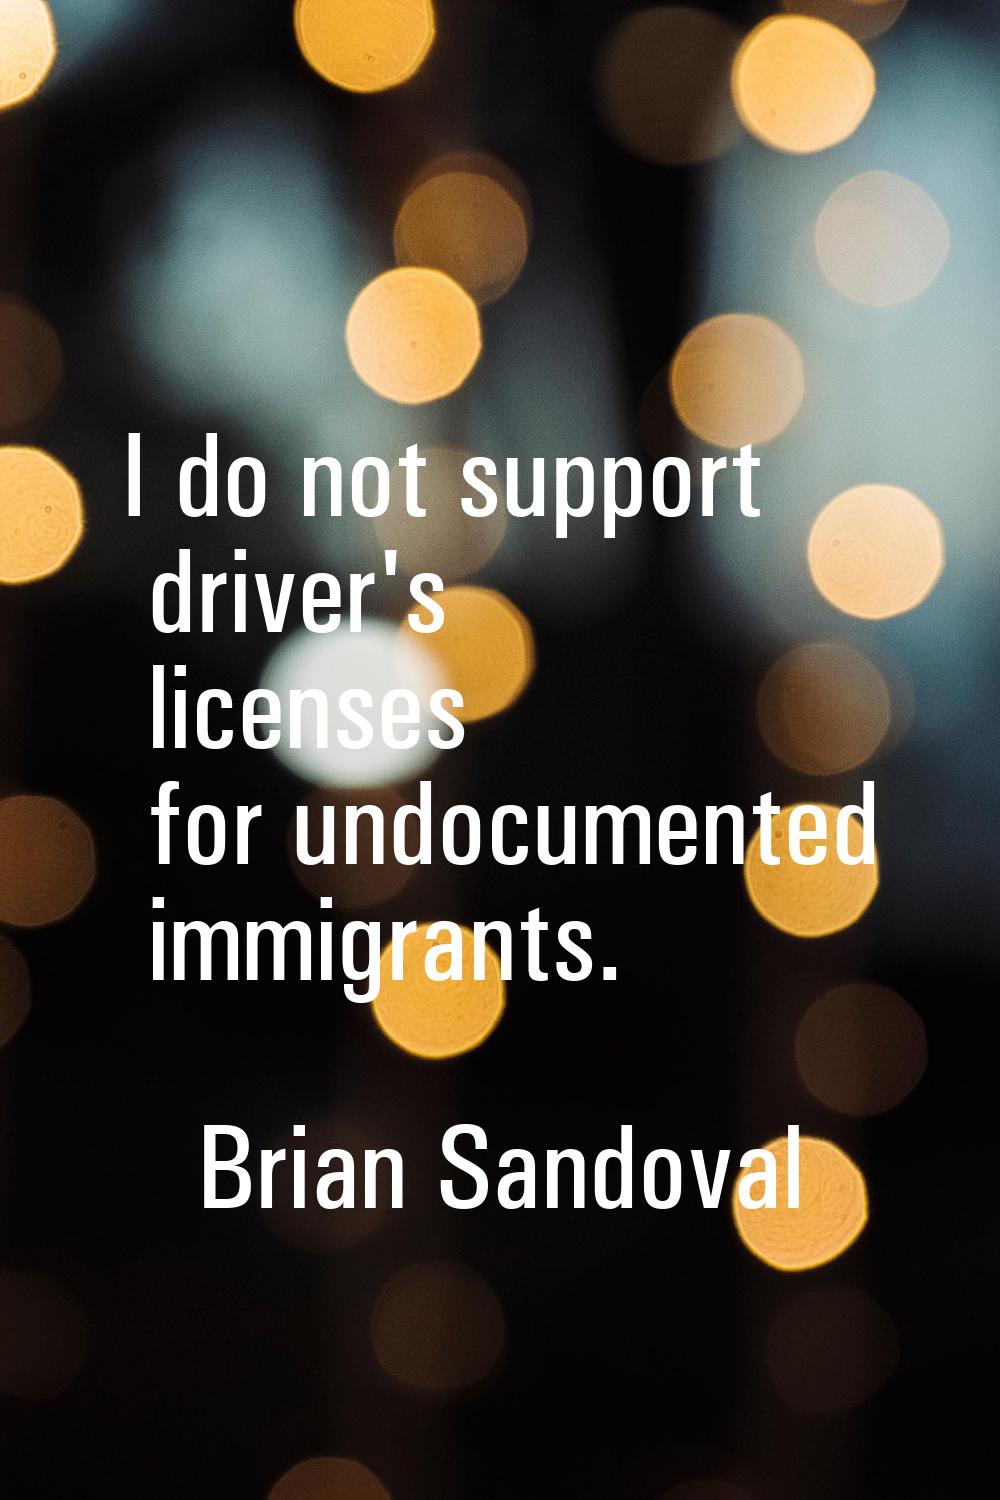 I do not support driver's licenses for undocumented immigrants.